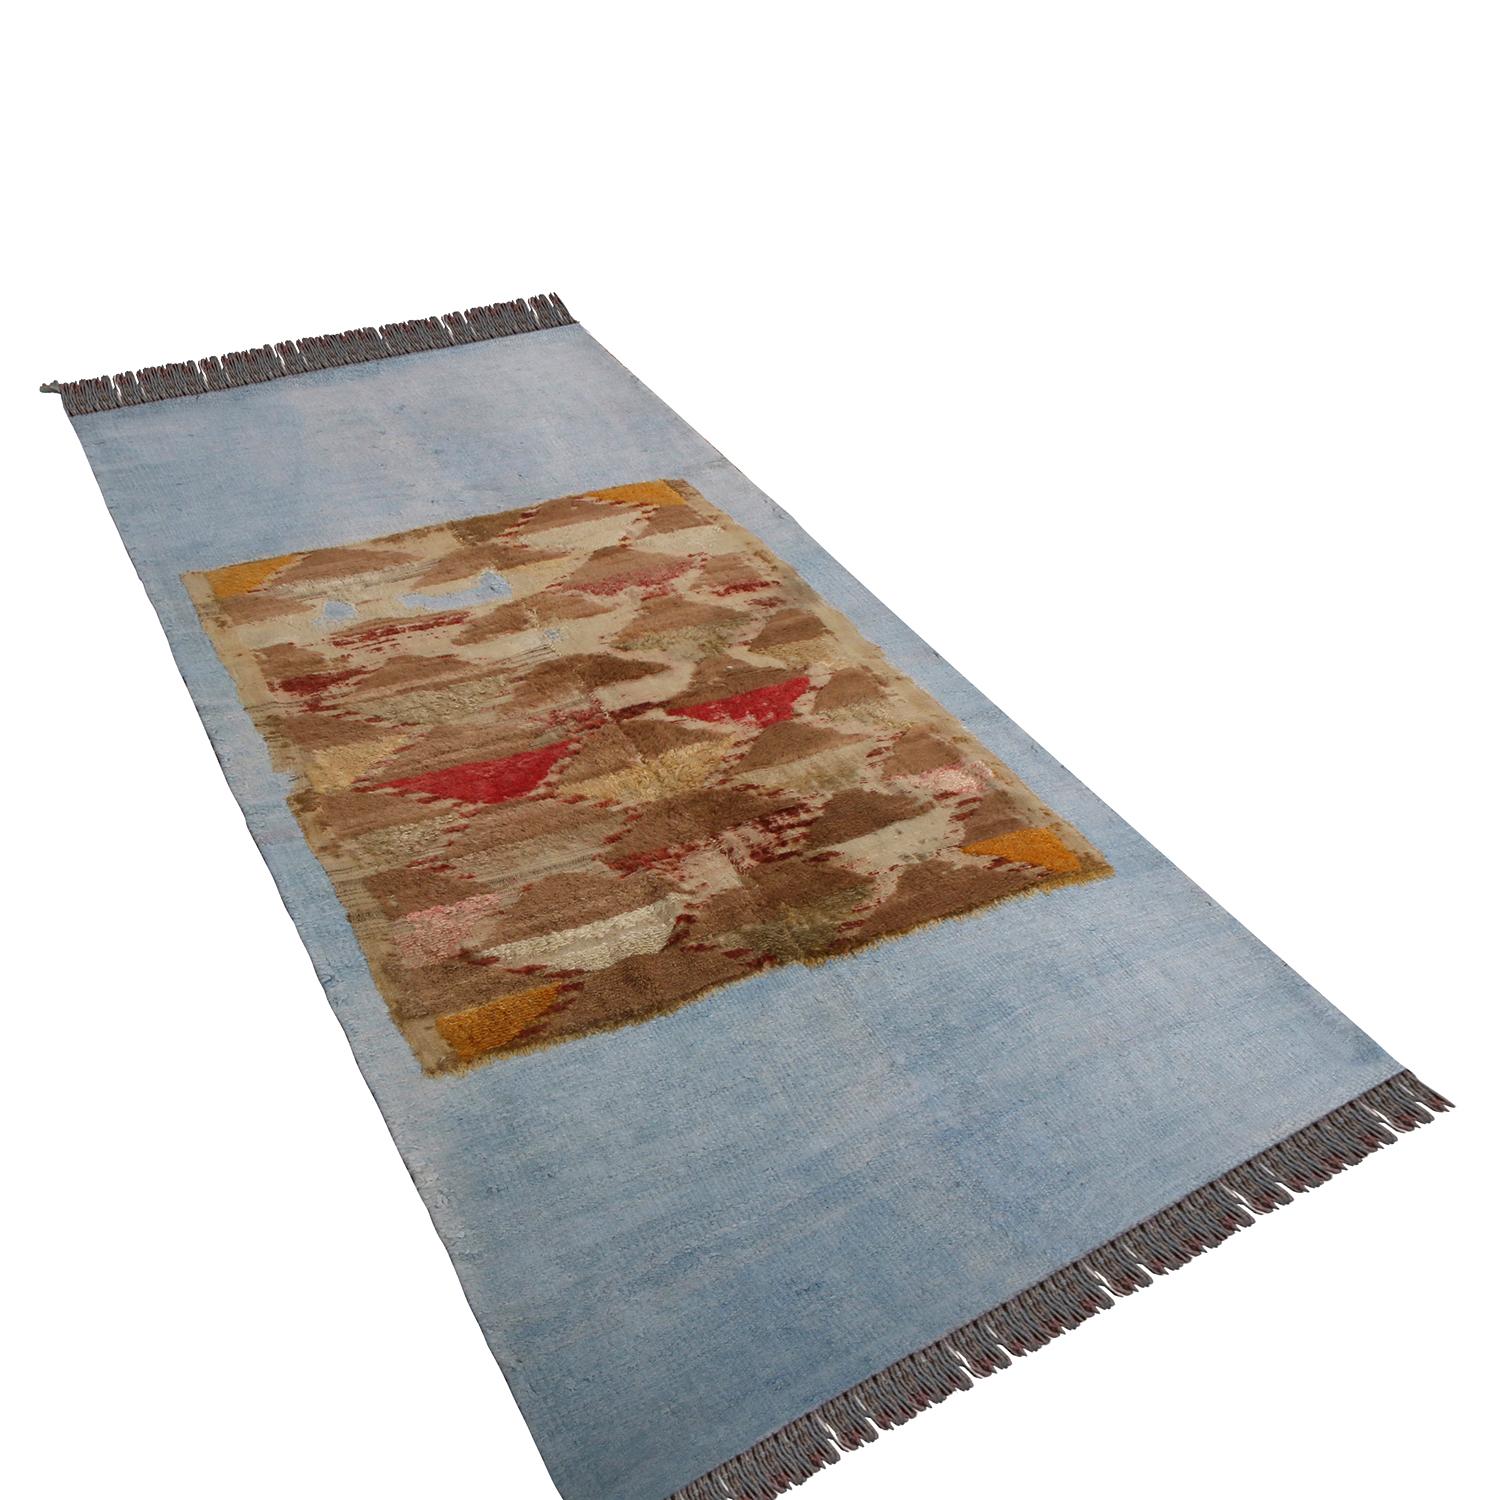 Hand woven in wool originating from Turkey between 1950-1960, this vintage mid-century flat-weave rug represents one of the most visually unique lines to join Rug & Kilim’s collection, a distinct layering of 1950s flatweaves creating a look both